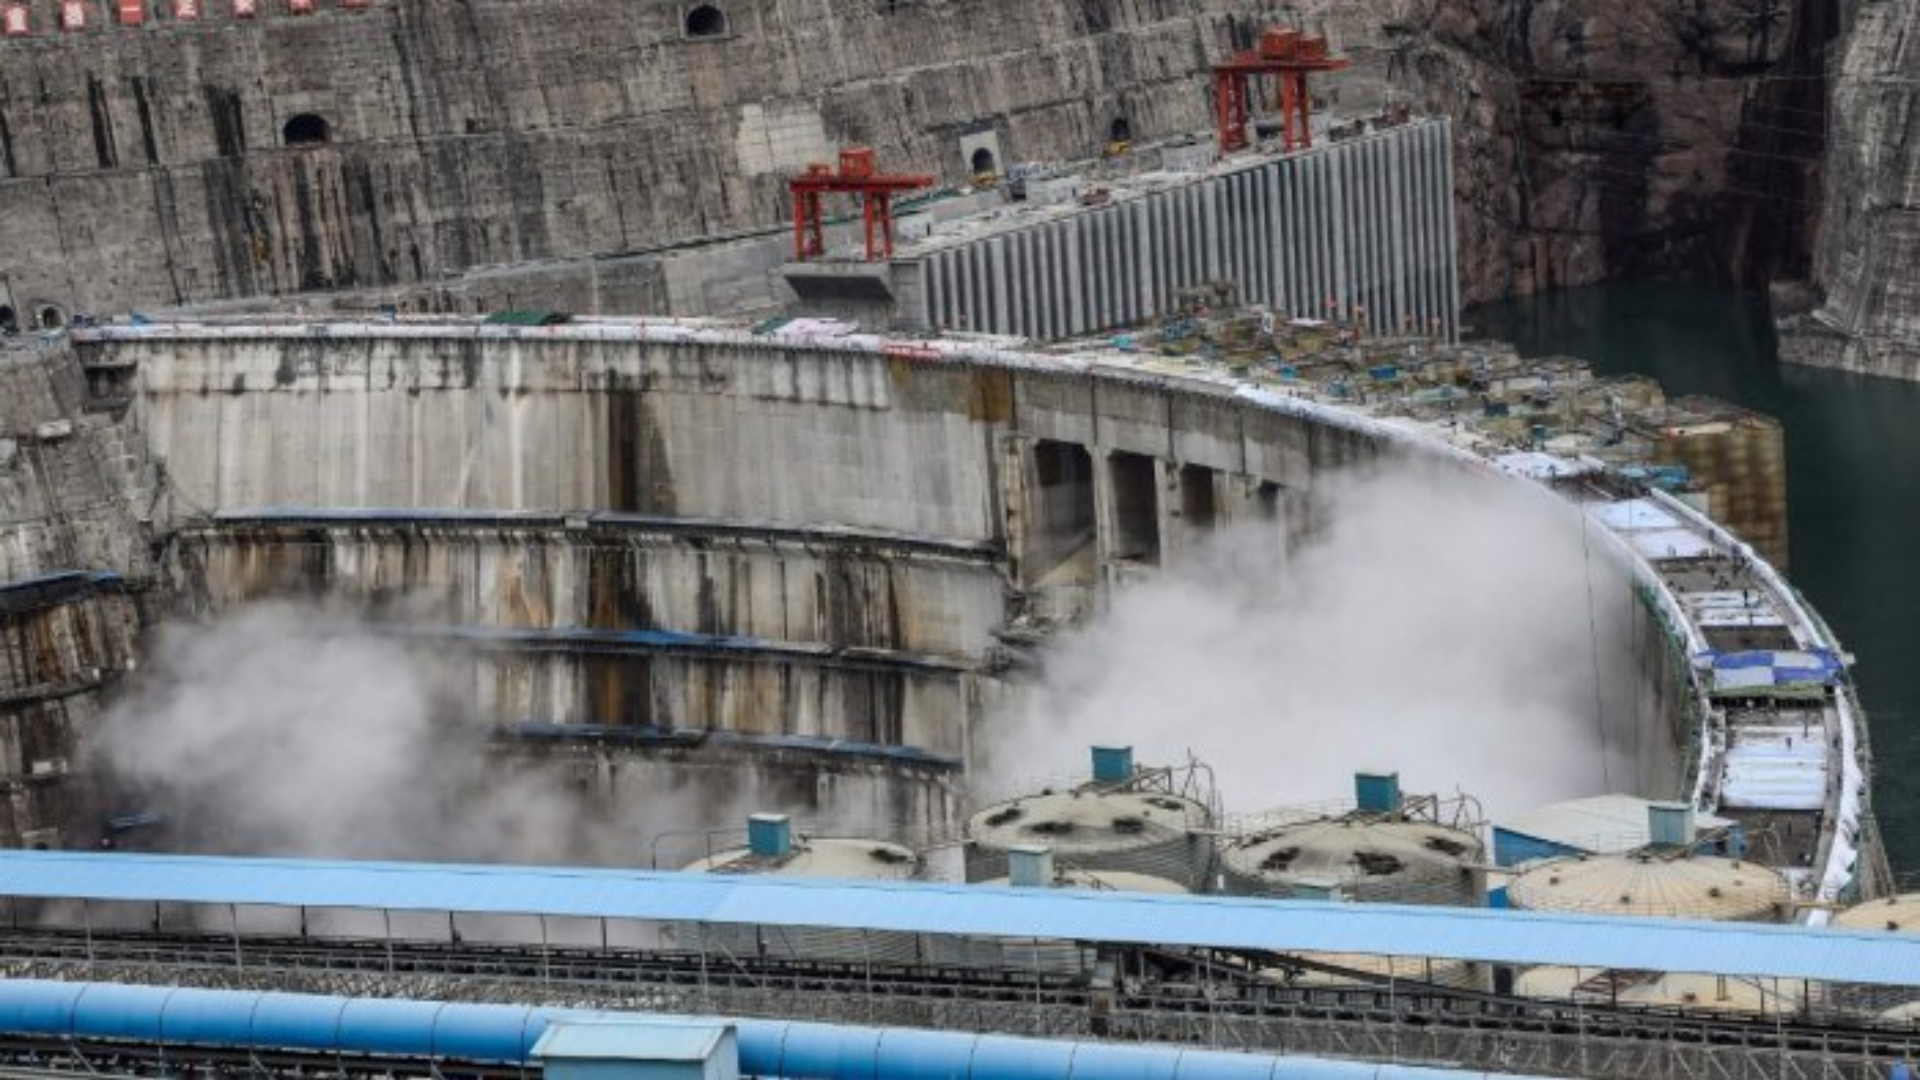 REC Powers Kiru Hydro project with Rs 1,869 Cr boost